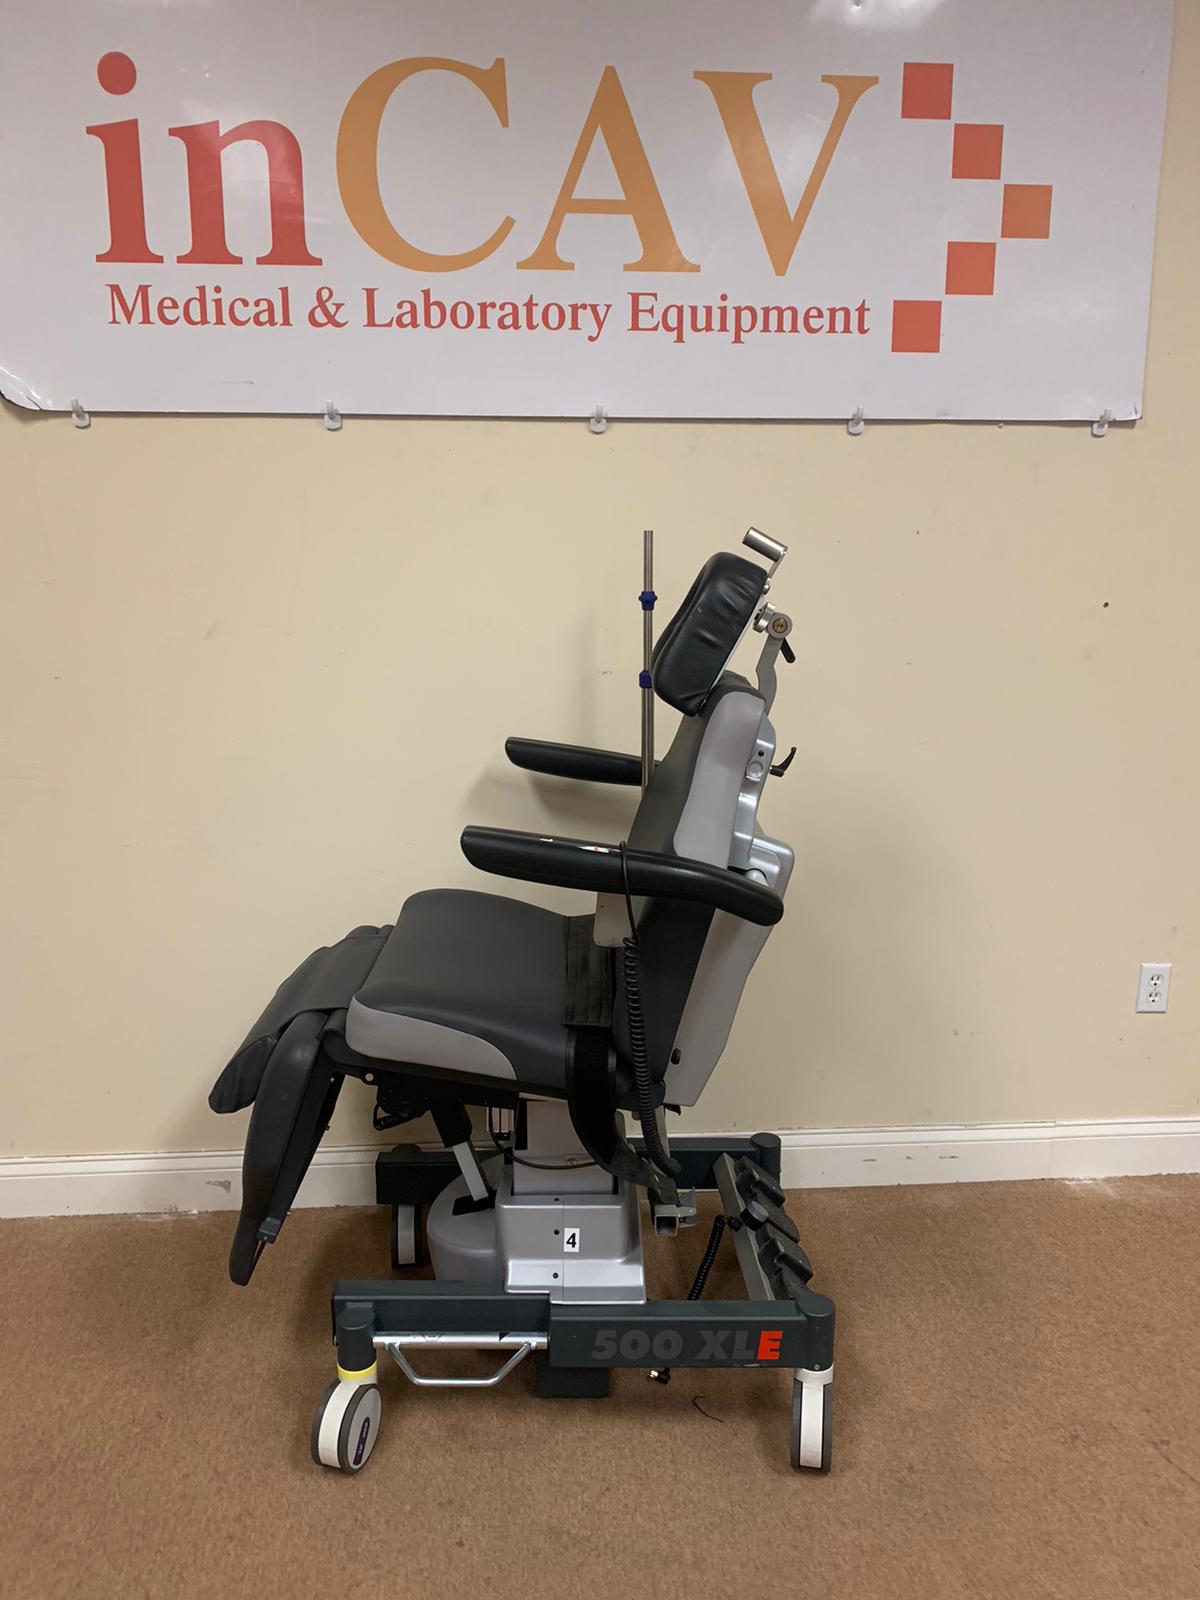 UFSK-OSYS 500 XLE Ophthalmic Treatment Chair Table w Power Supply & Remote